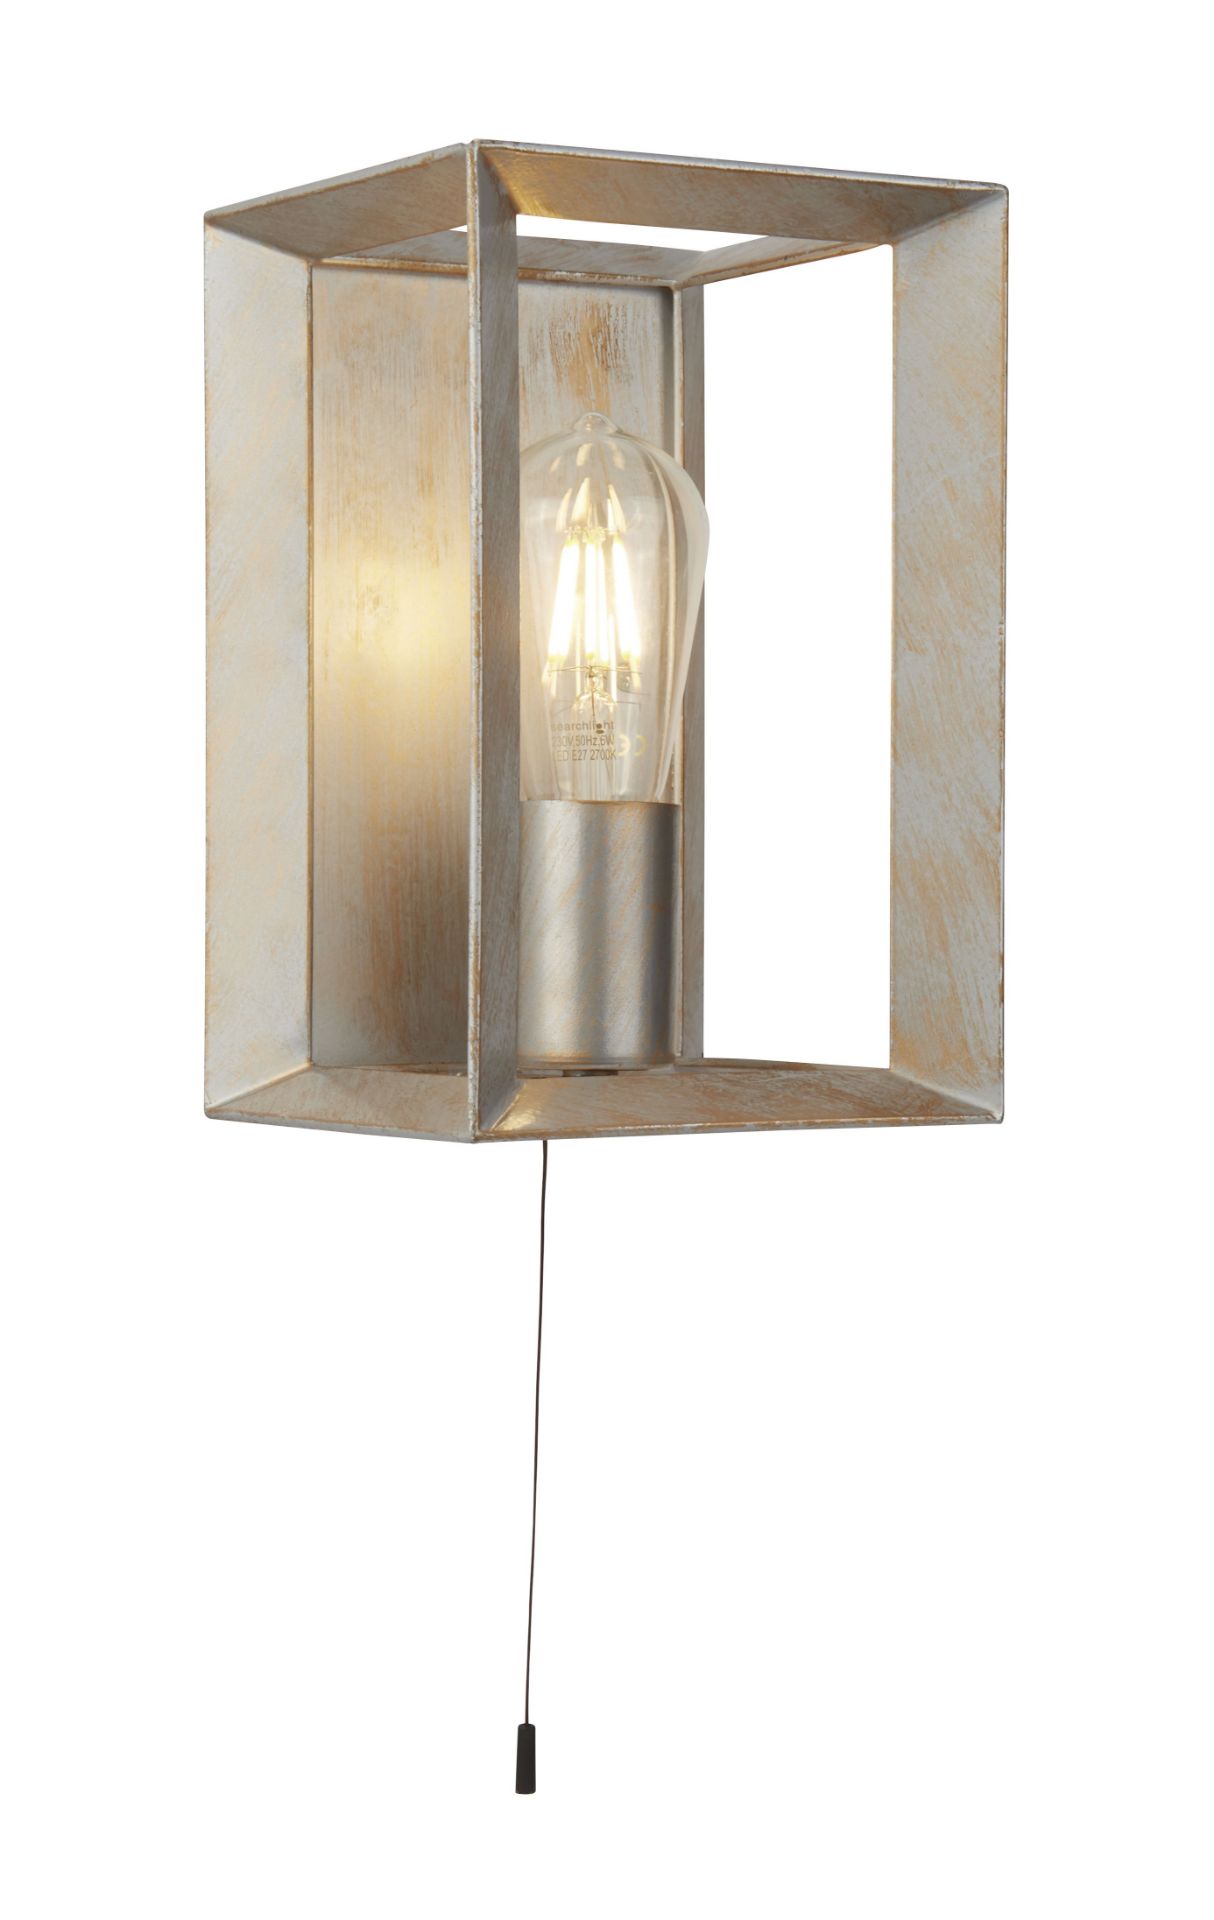 BRUSHED SILVER GOLD WALL LIGHT, 23.5CM HIGH, 60W.